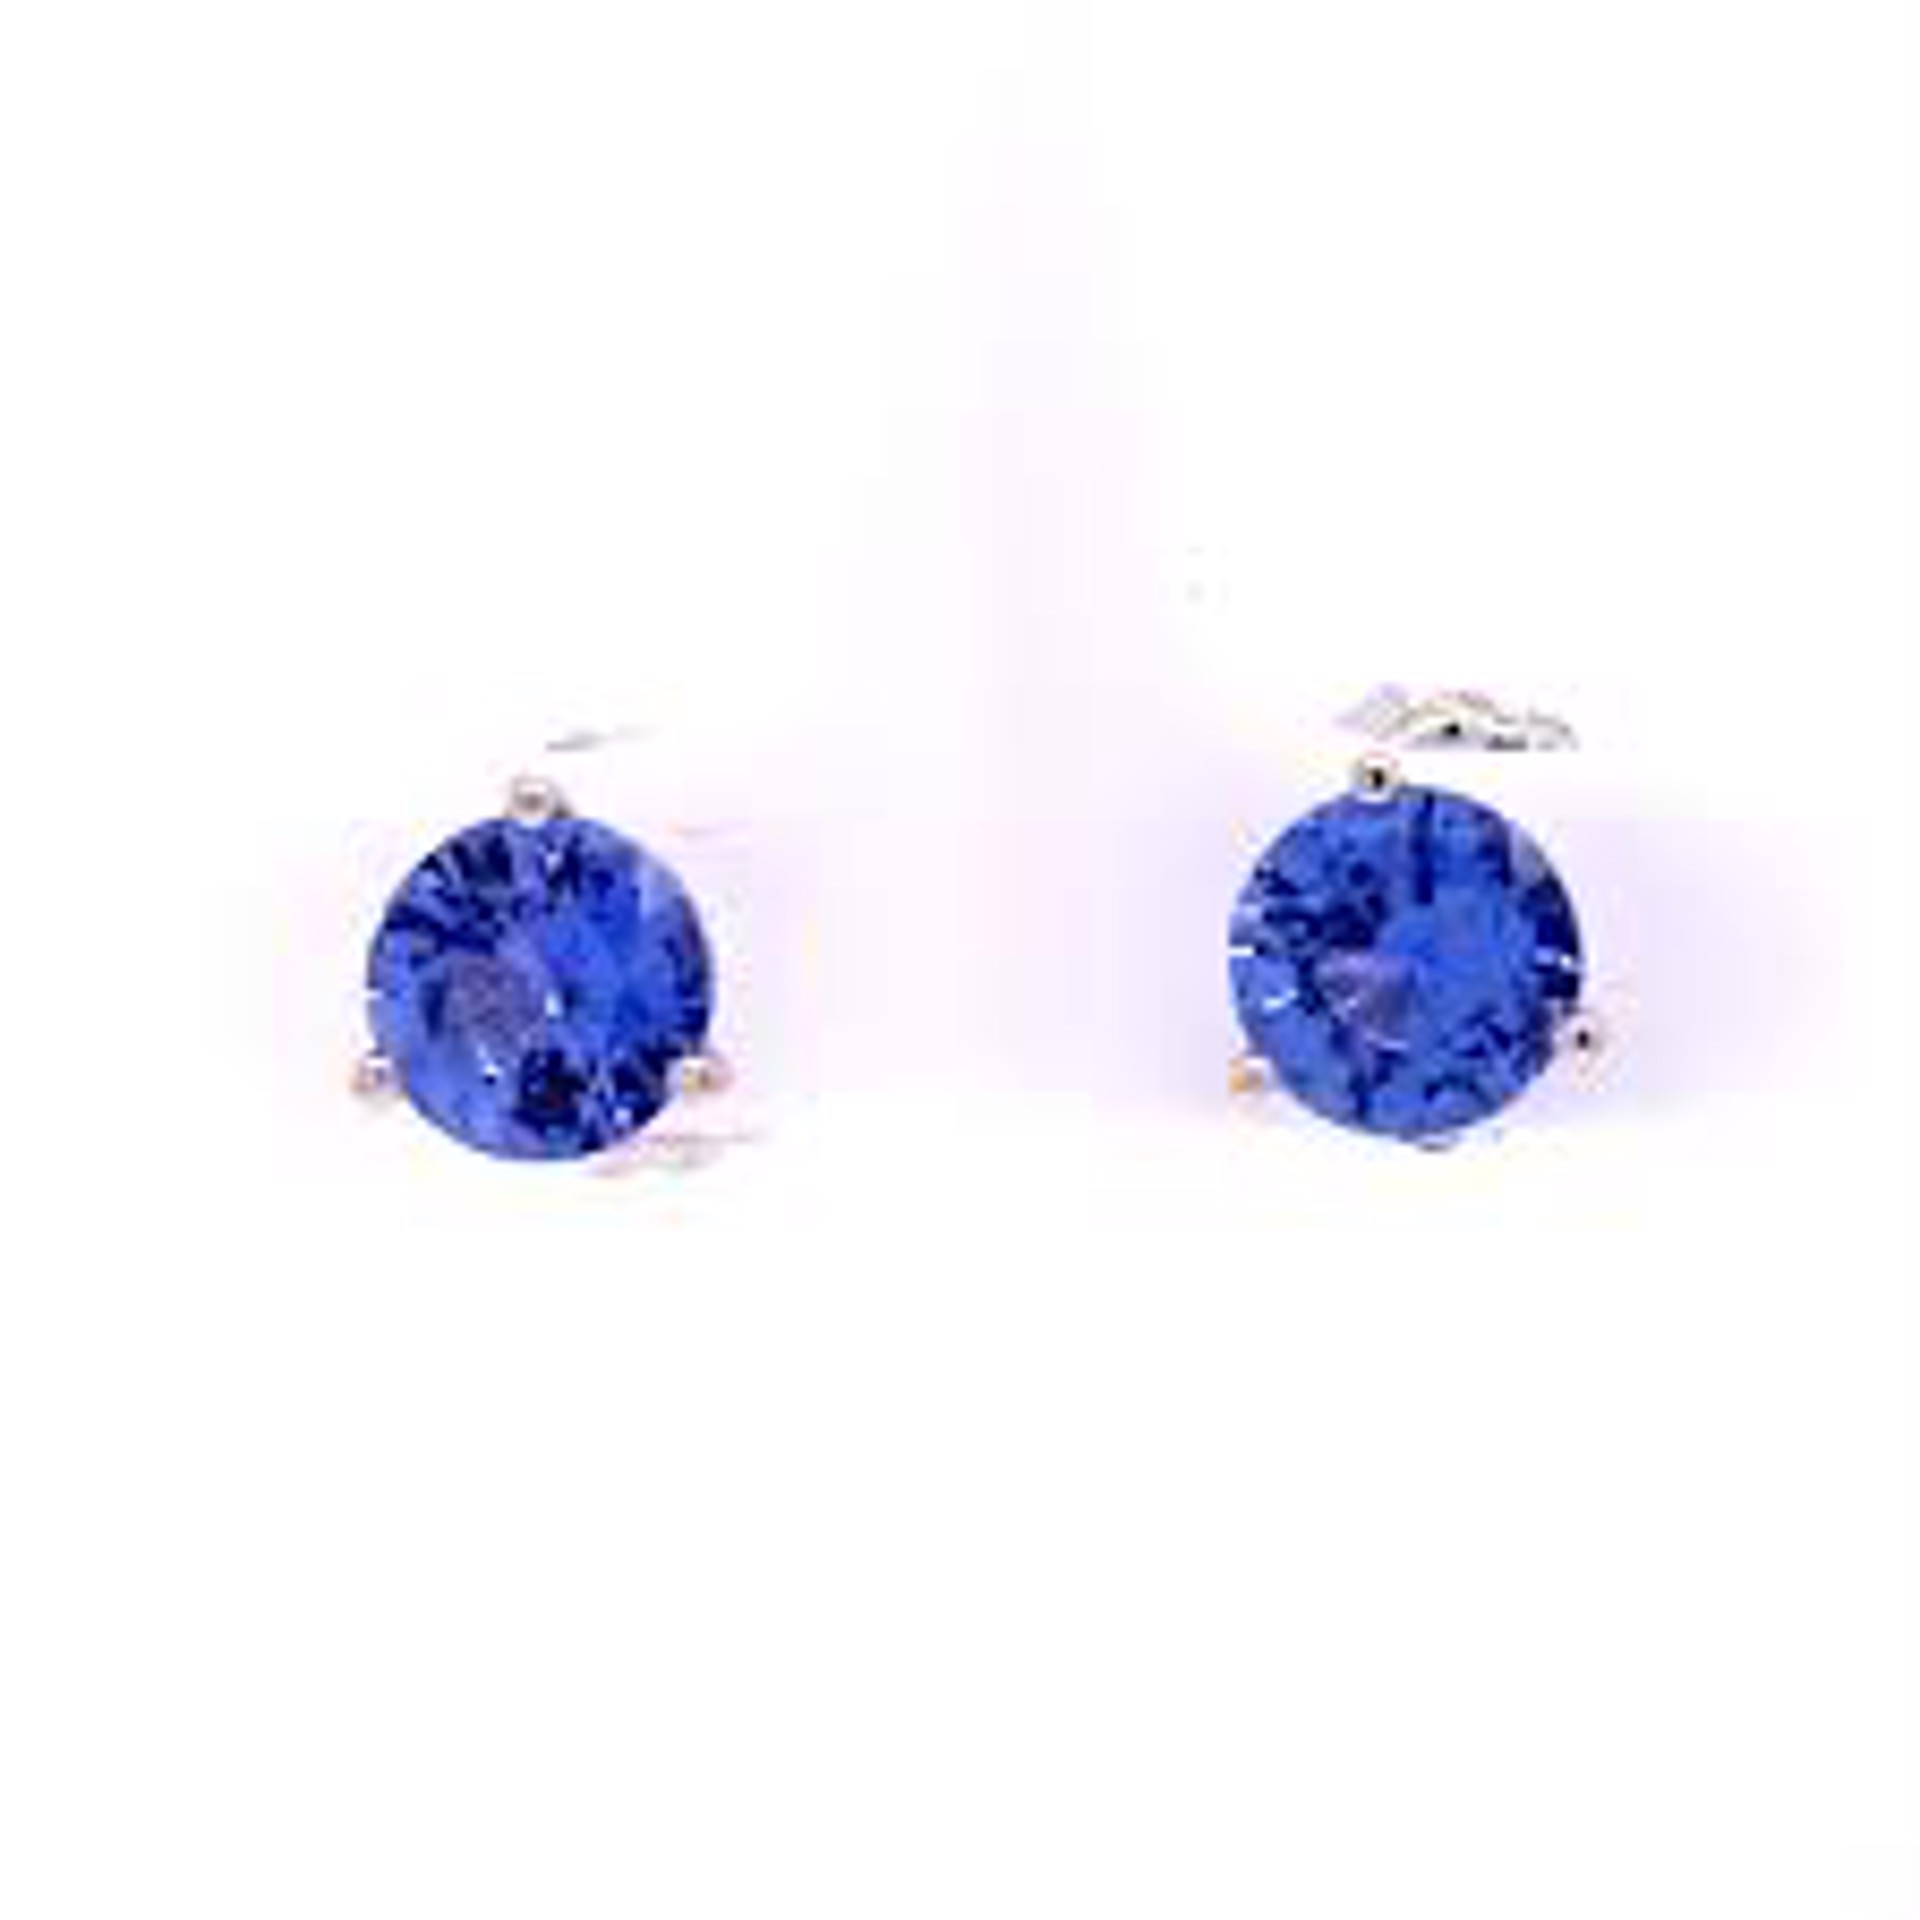 Blue Sapphire Studs by Llyn Strong